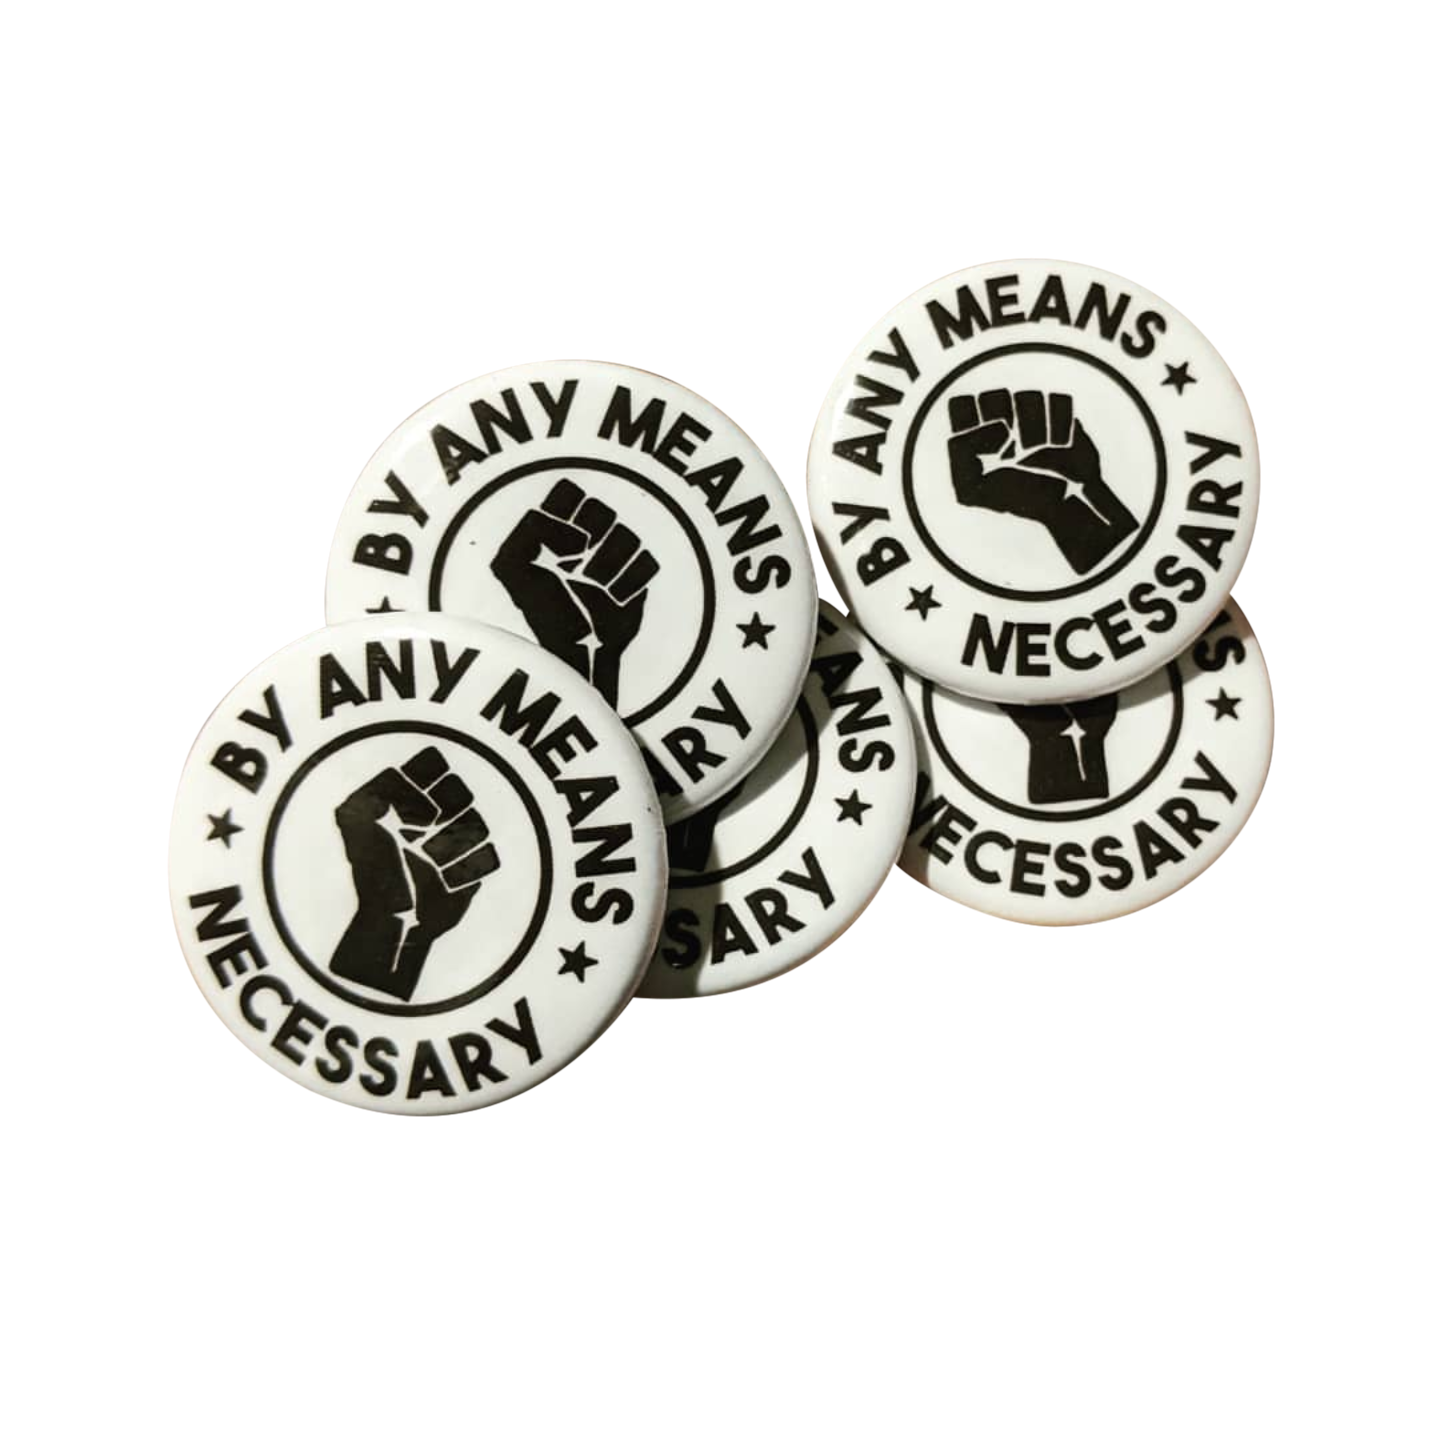 Buy Any Means Button - Jade Record Shoppe